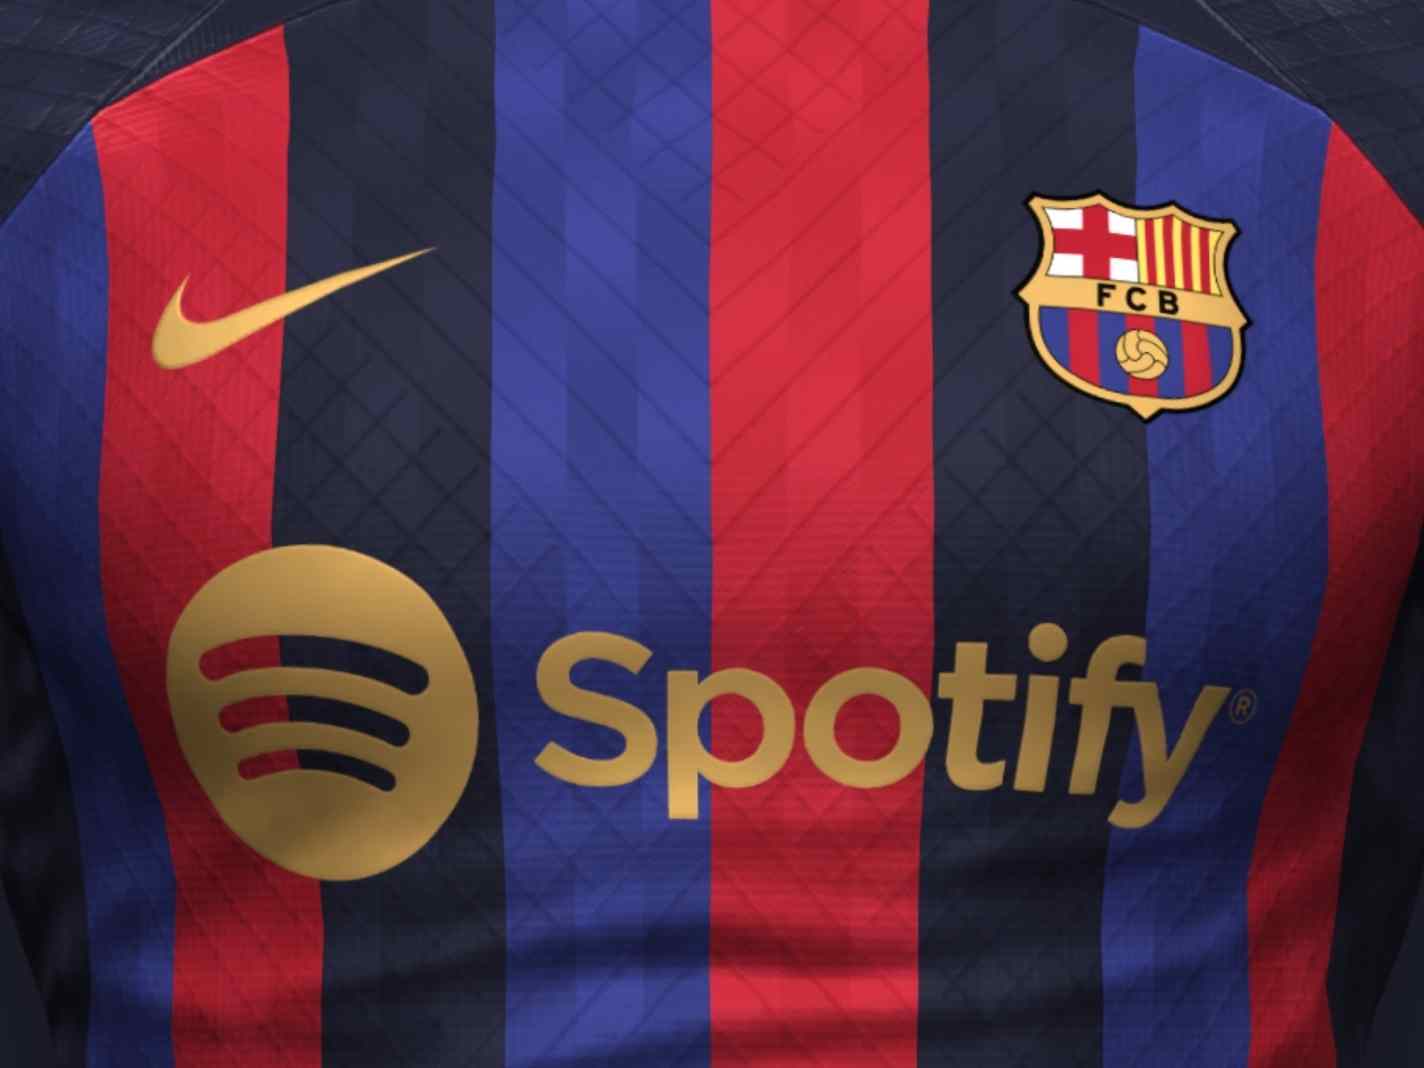 PHOTO: Barcelona players don 22/23 home kit with Spotify logo in new leak